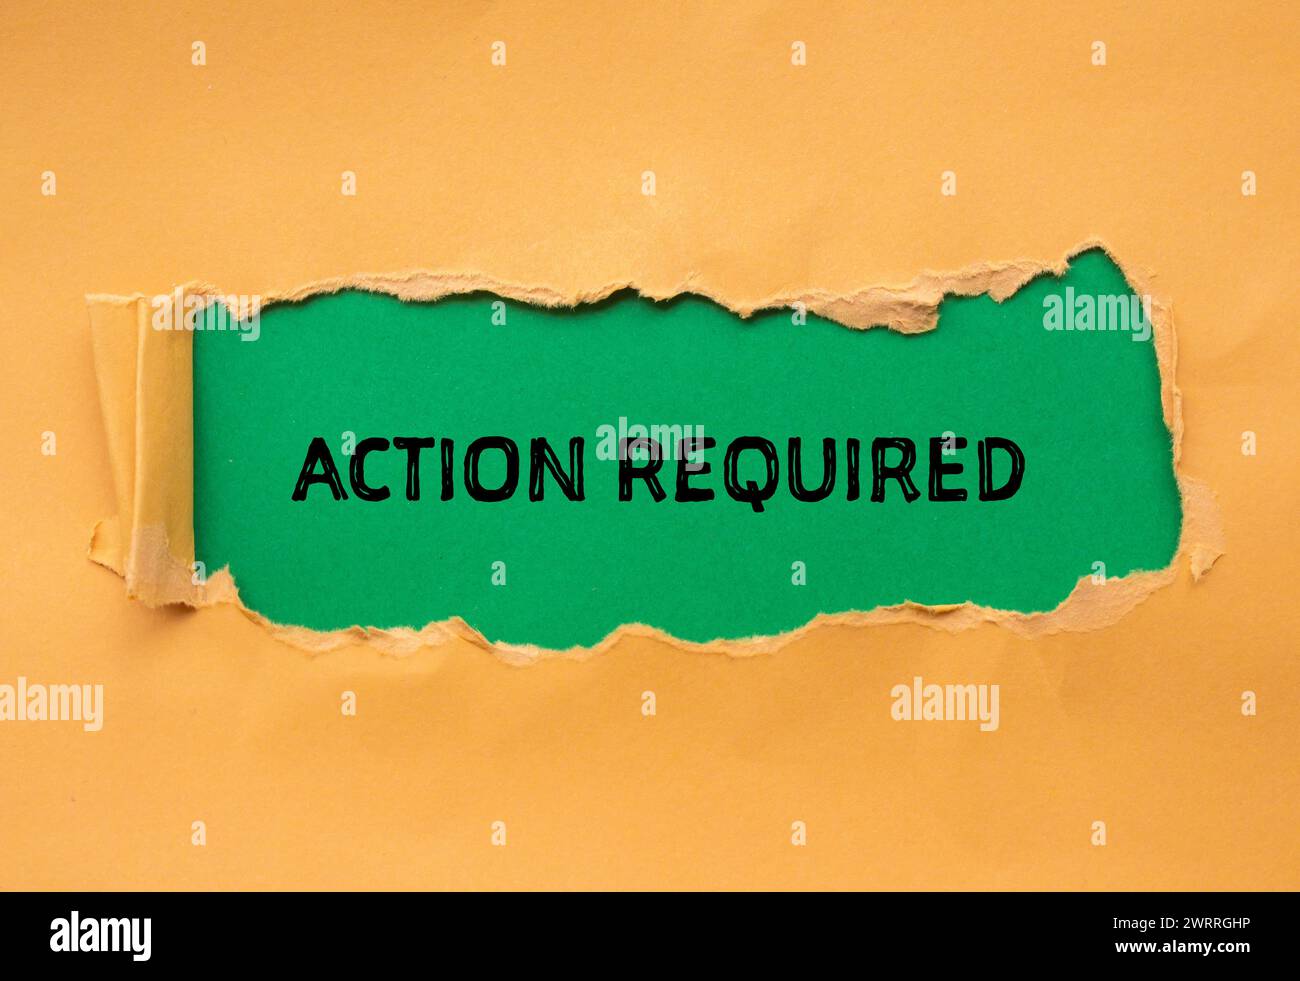 Action required words written on orange torn paper with green background. Conceptual symbol. Copy space. Stock Photo